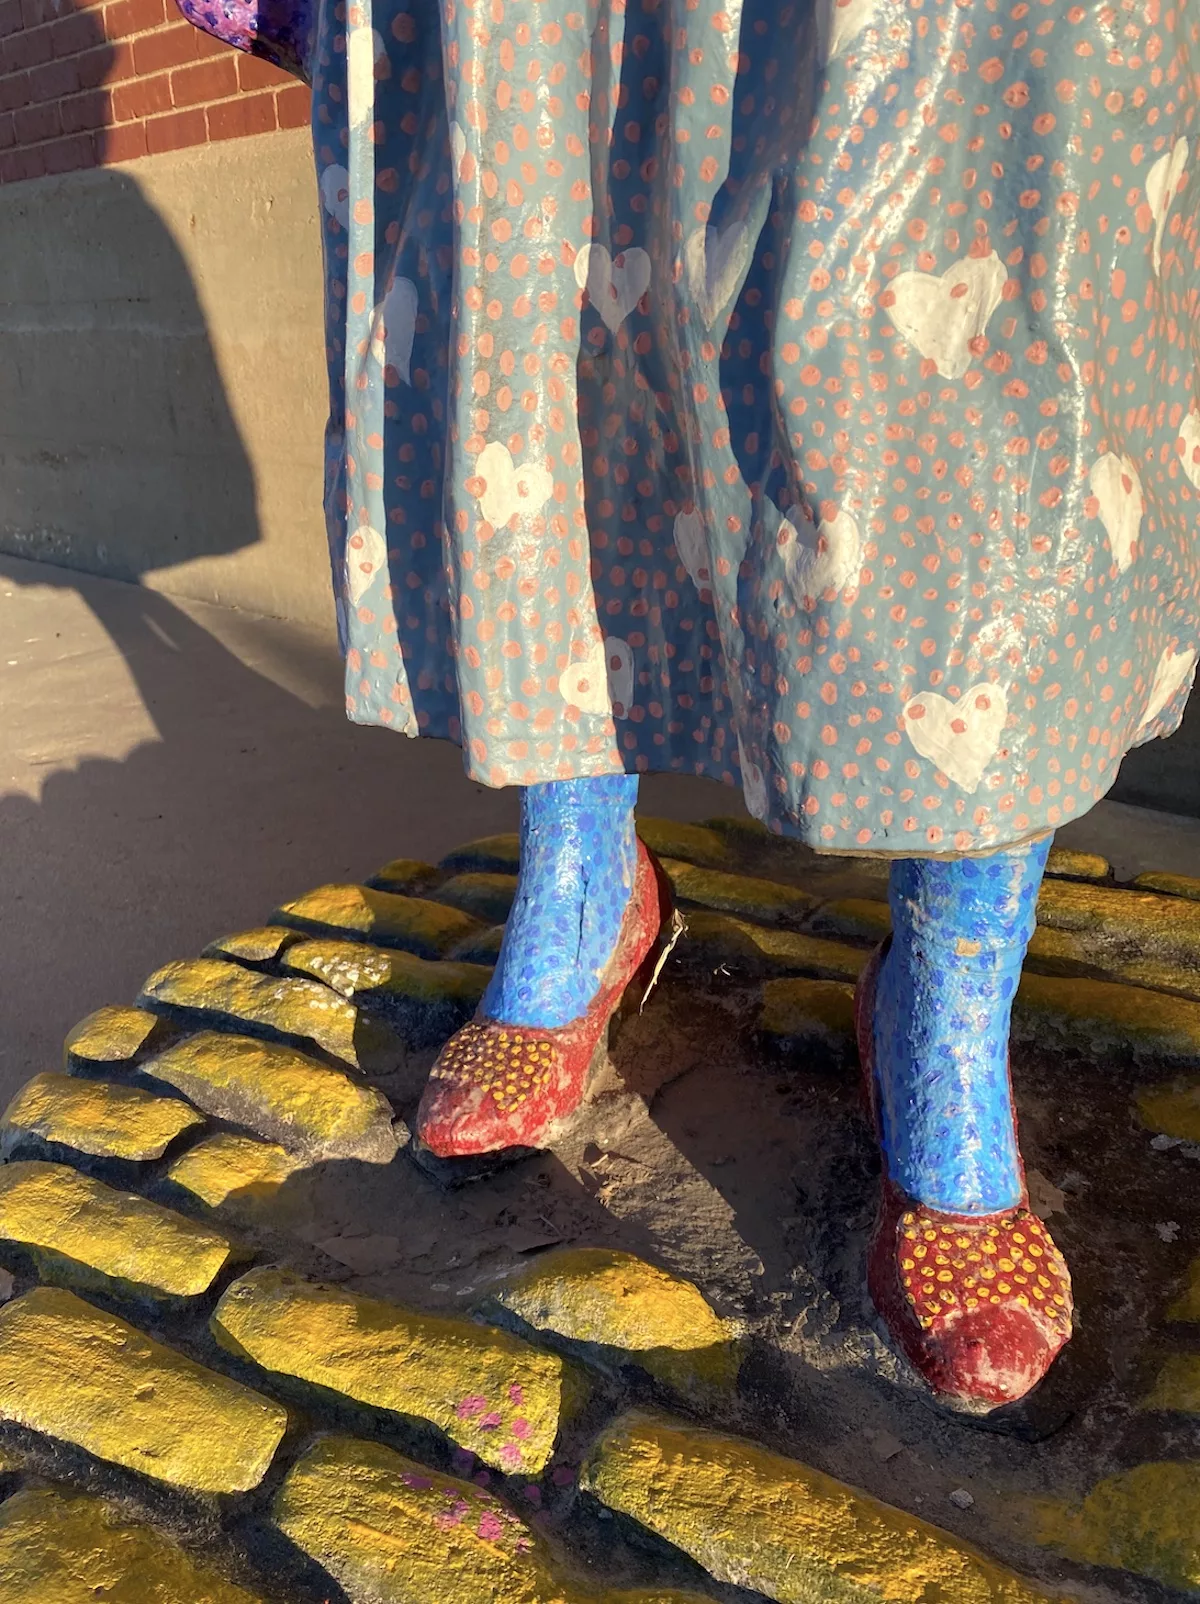 Close-up of polka dotted statue of Dorothy Gale in Liberal, Kansas